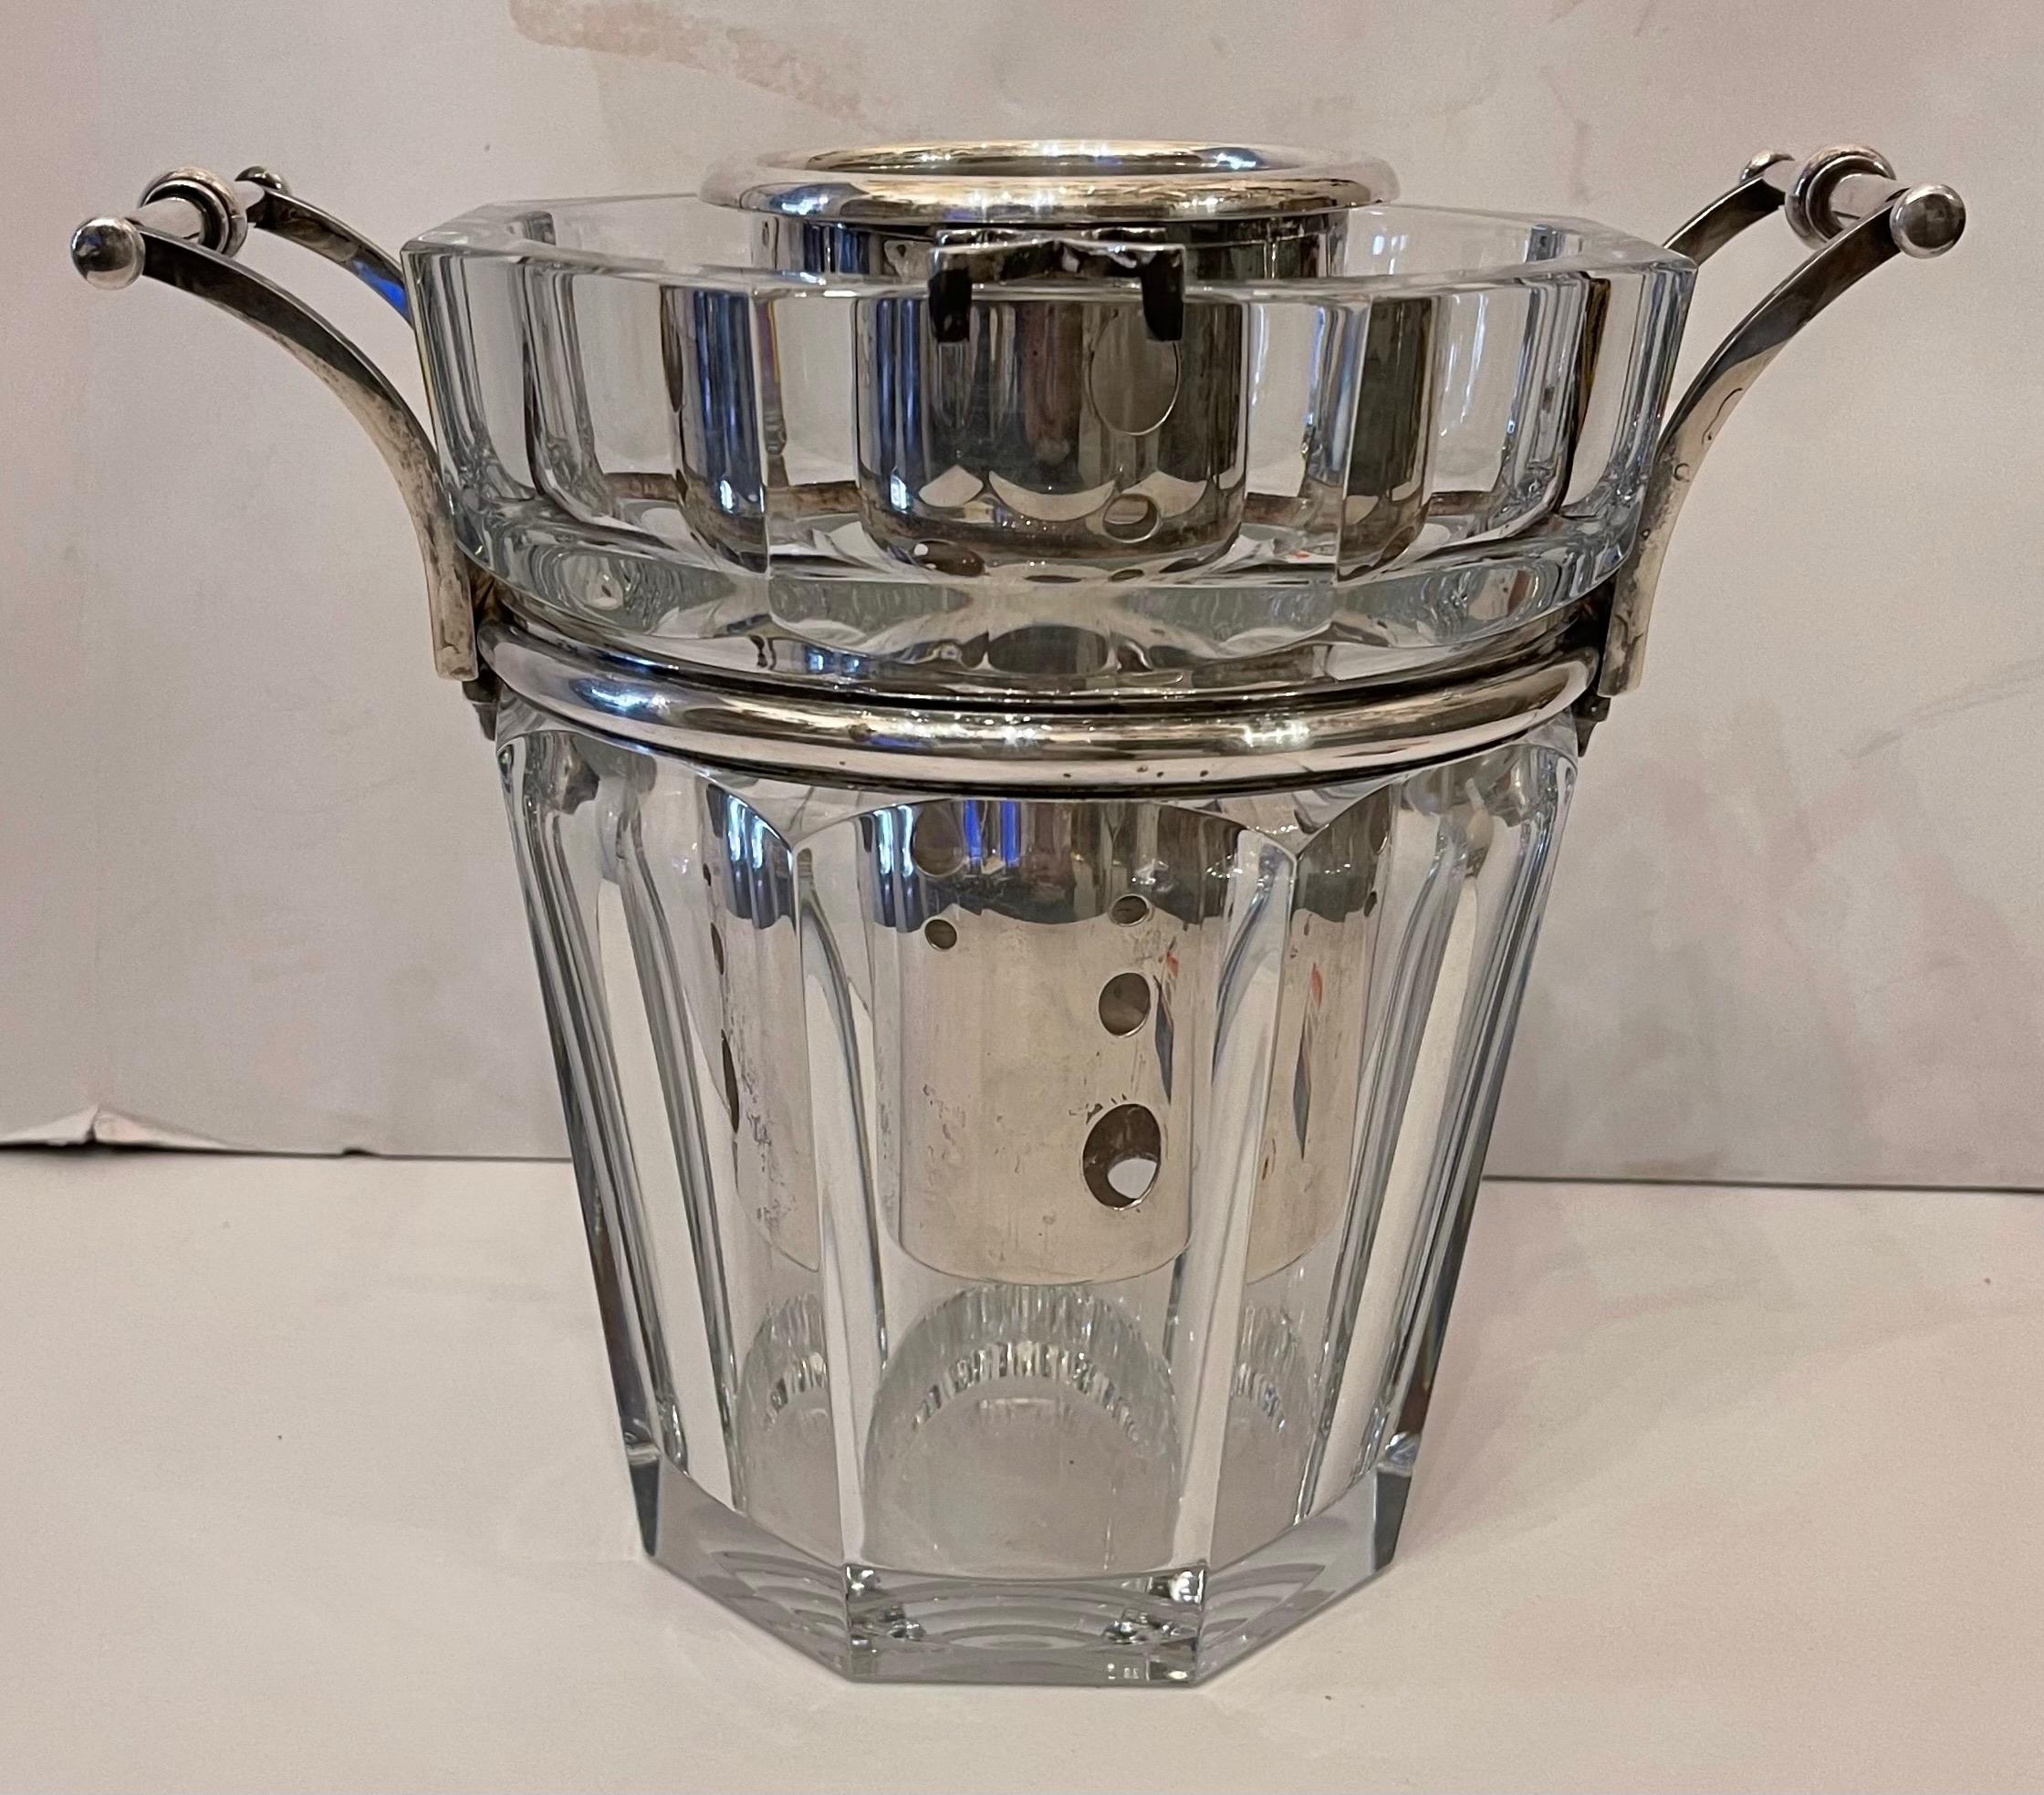 A modern Baccarat Moulin rouge / harcourt crystal champagne cooler ice bucket, with acid-etched maker's mark to underside, 
The octagonal tapering clear crystal is mounted with polished nickel / silver plated handles. The handles may be removed as